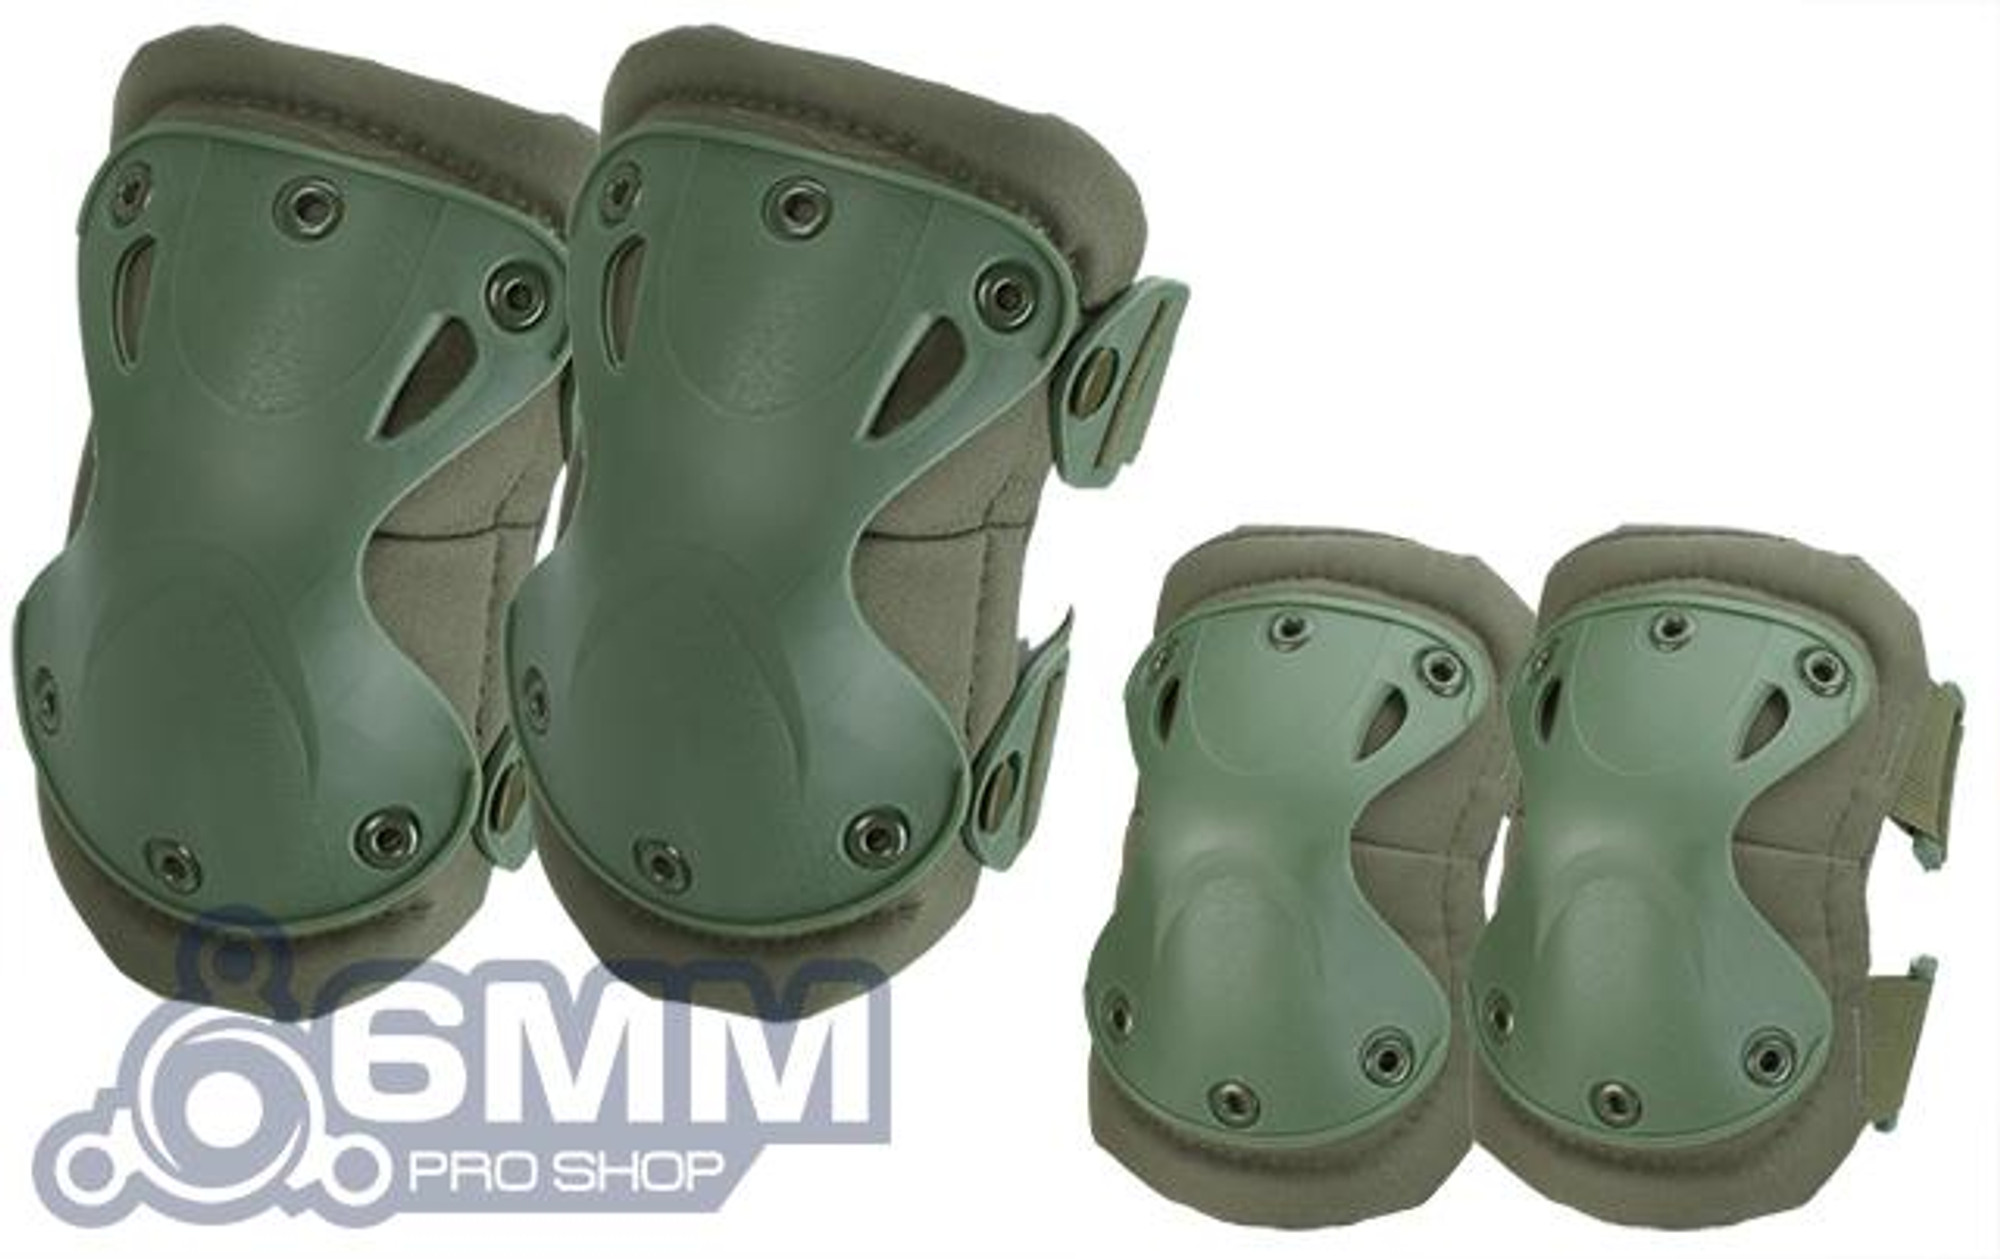 6mmProShop Tactical Knee & Elbow Pad Set - OD Green